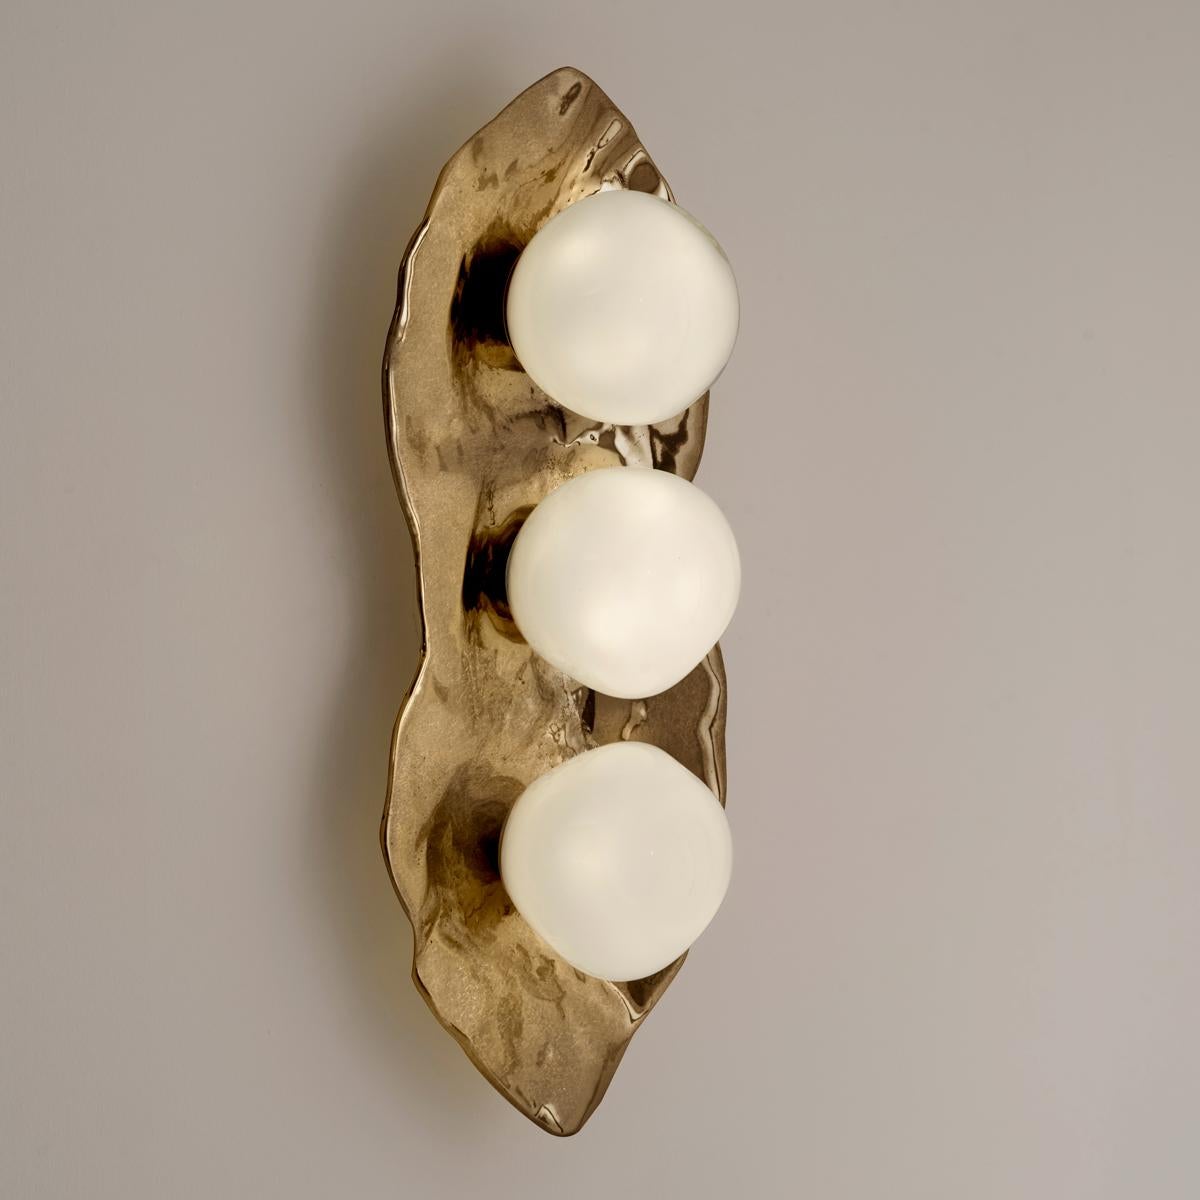 The Shell wall light is forged from brass to create an organic shell nestling three of our handblown Sfera glasses made in Murano.

Shown in the primary images in Bronzo Nuvolato-subsequent pictures show the fixture in other featured